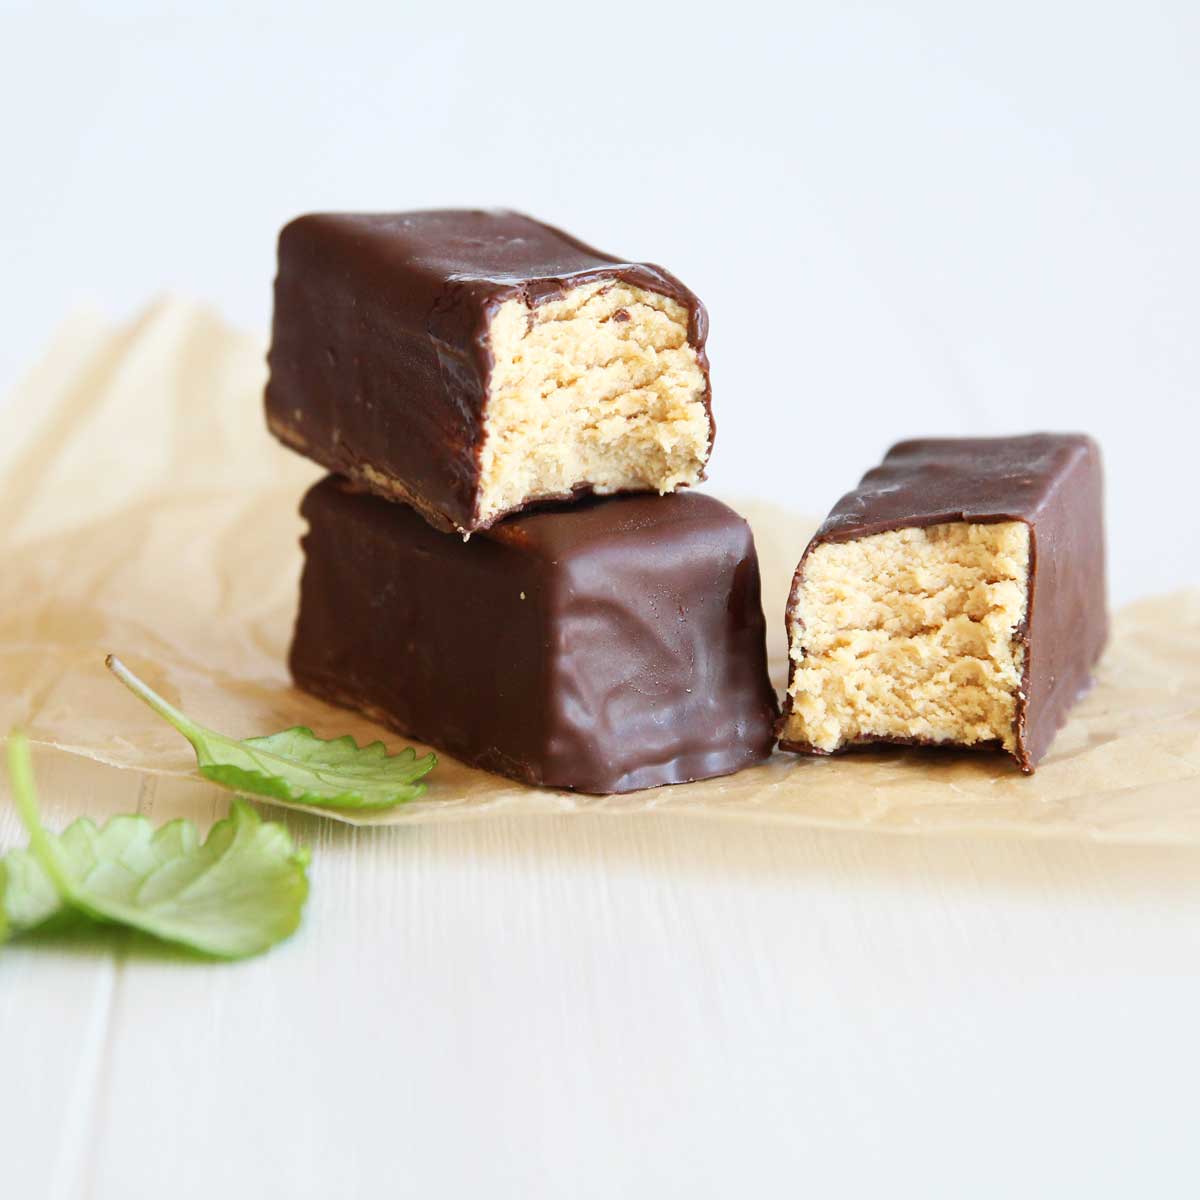 10-Minute Chocolate Peanut Butter Oatmeal Protein Bars - Chocolate Peanut Butter Oatmeal Protein Bars